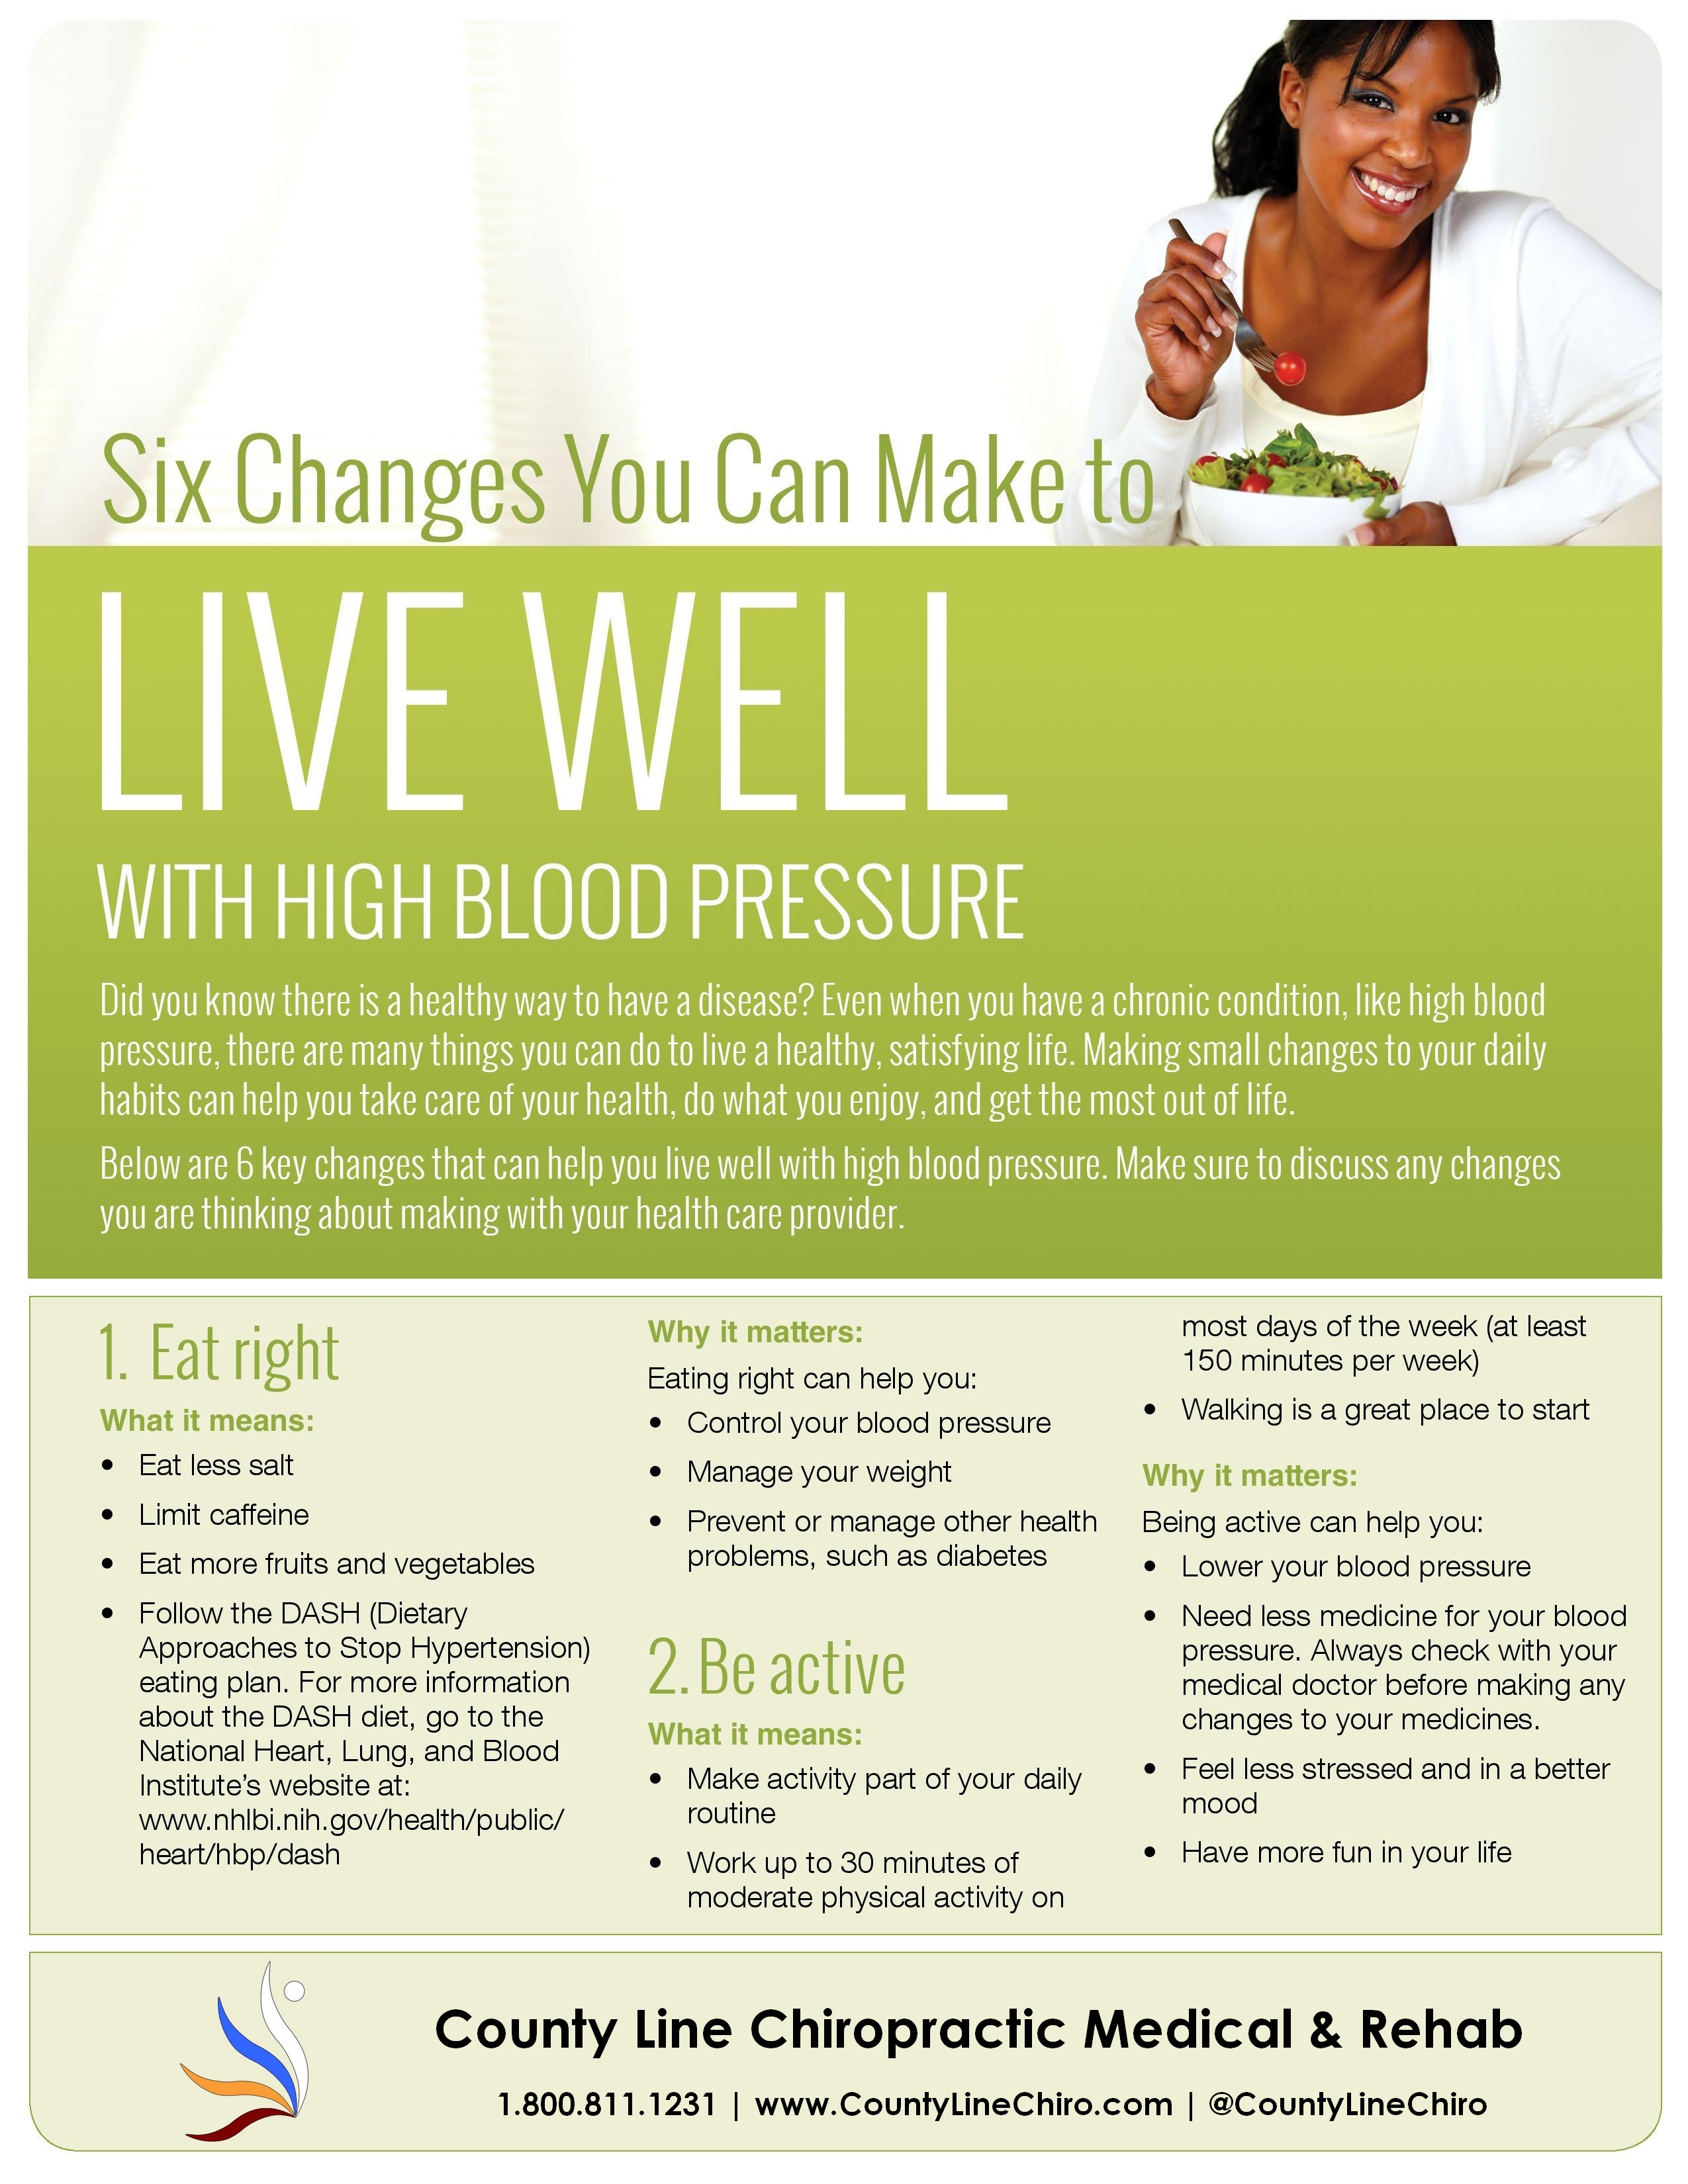 Six Changes You Can Make to Live Well with High Blood Pressure